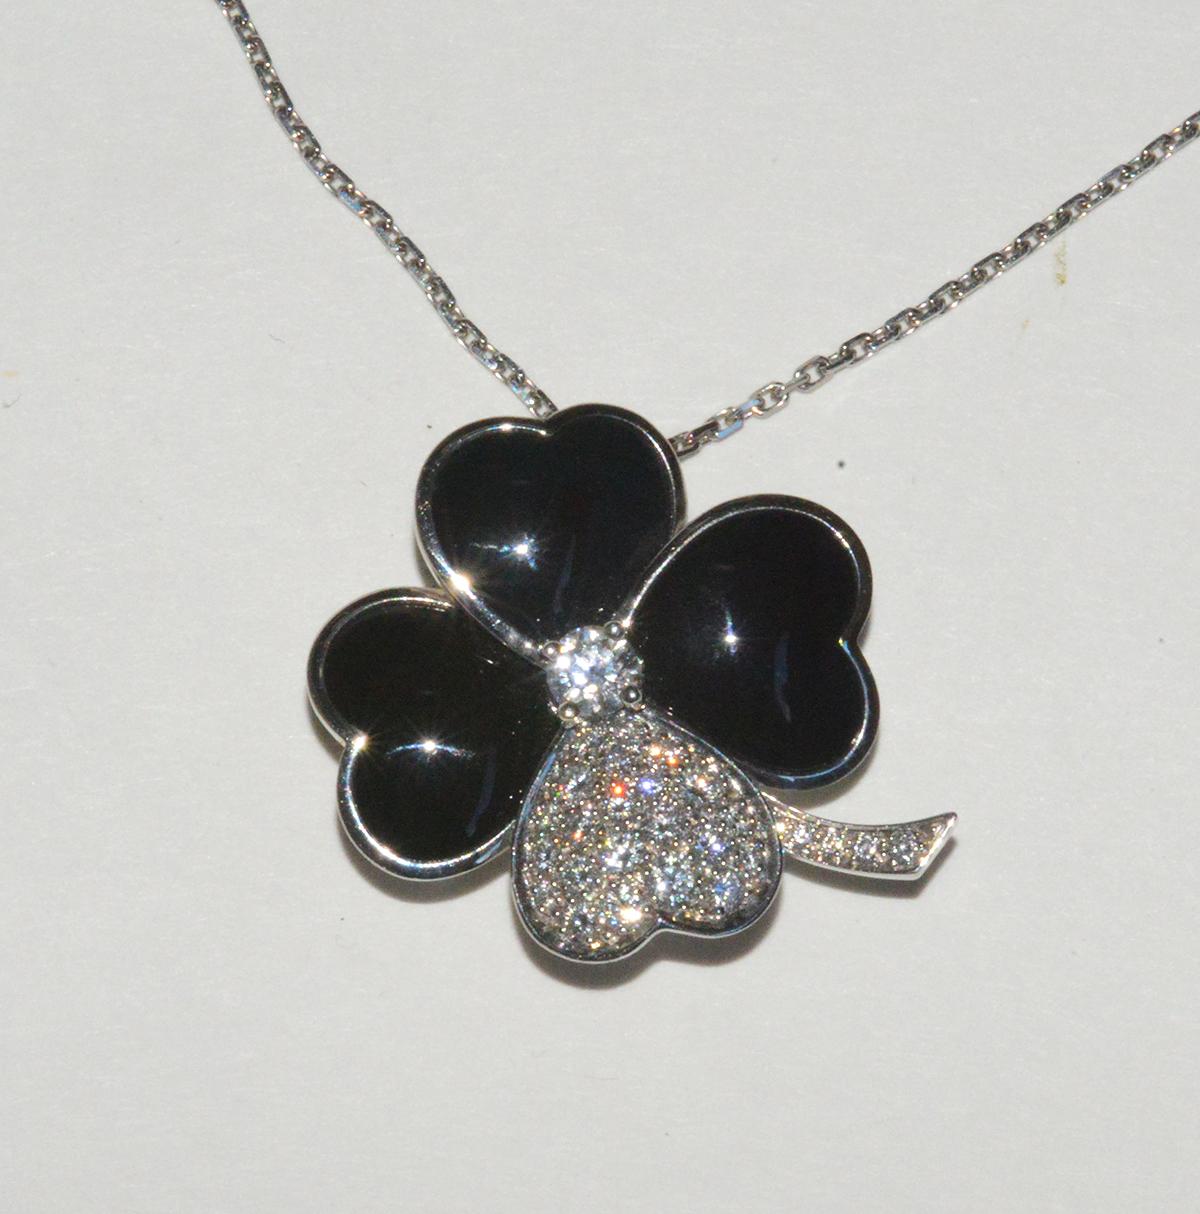 This is a most magnificent, rare, discontinued VCA flower/clover pin/pendant in 18K white gold. There are 3, heart shaped petals and one all diamond pave heart shaped petal. There is a diamond center. This is the largest clover pendant VCA makes. 